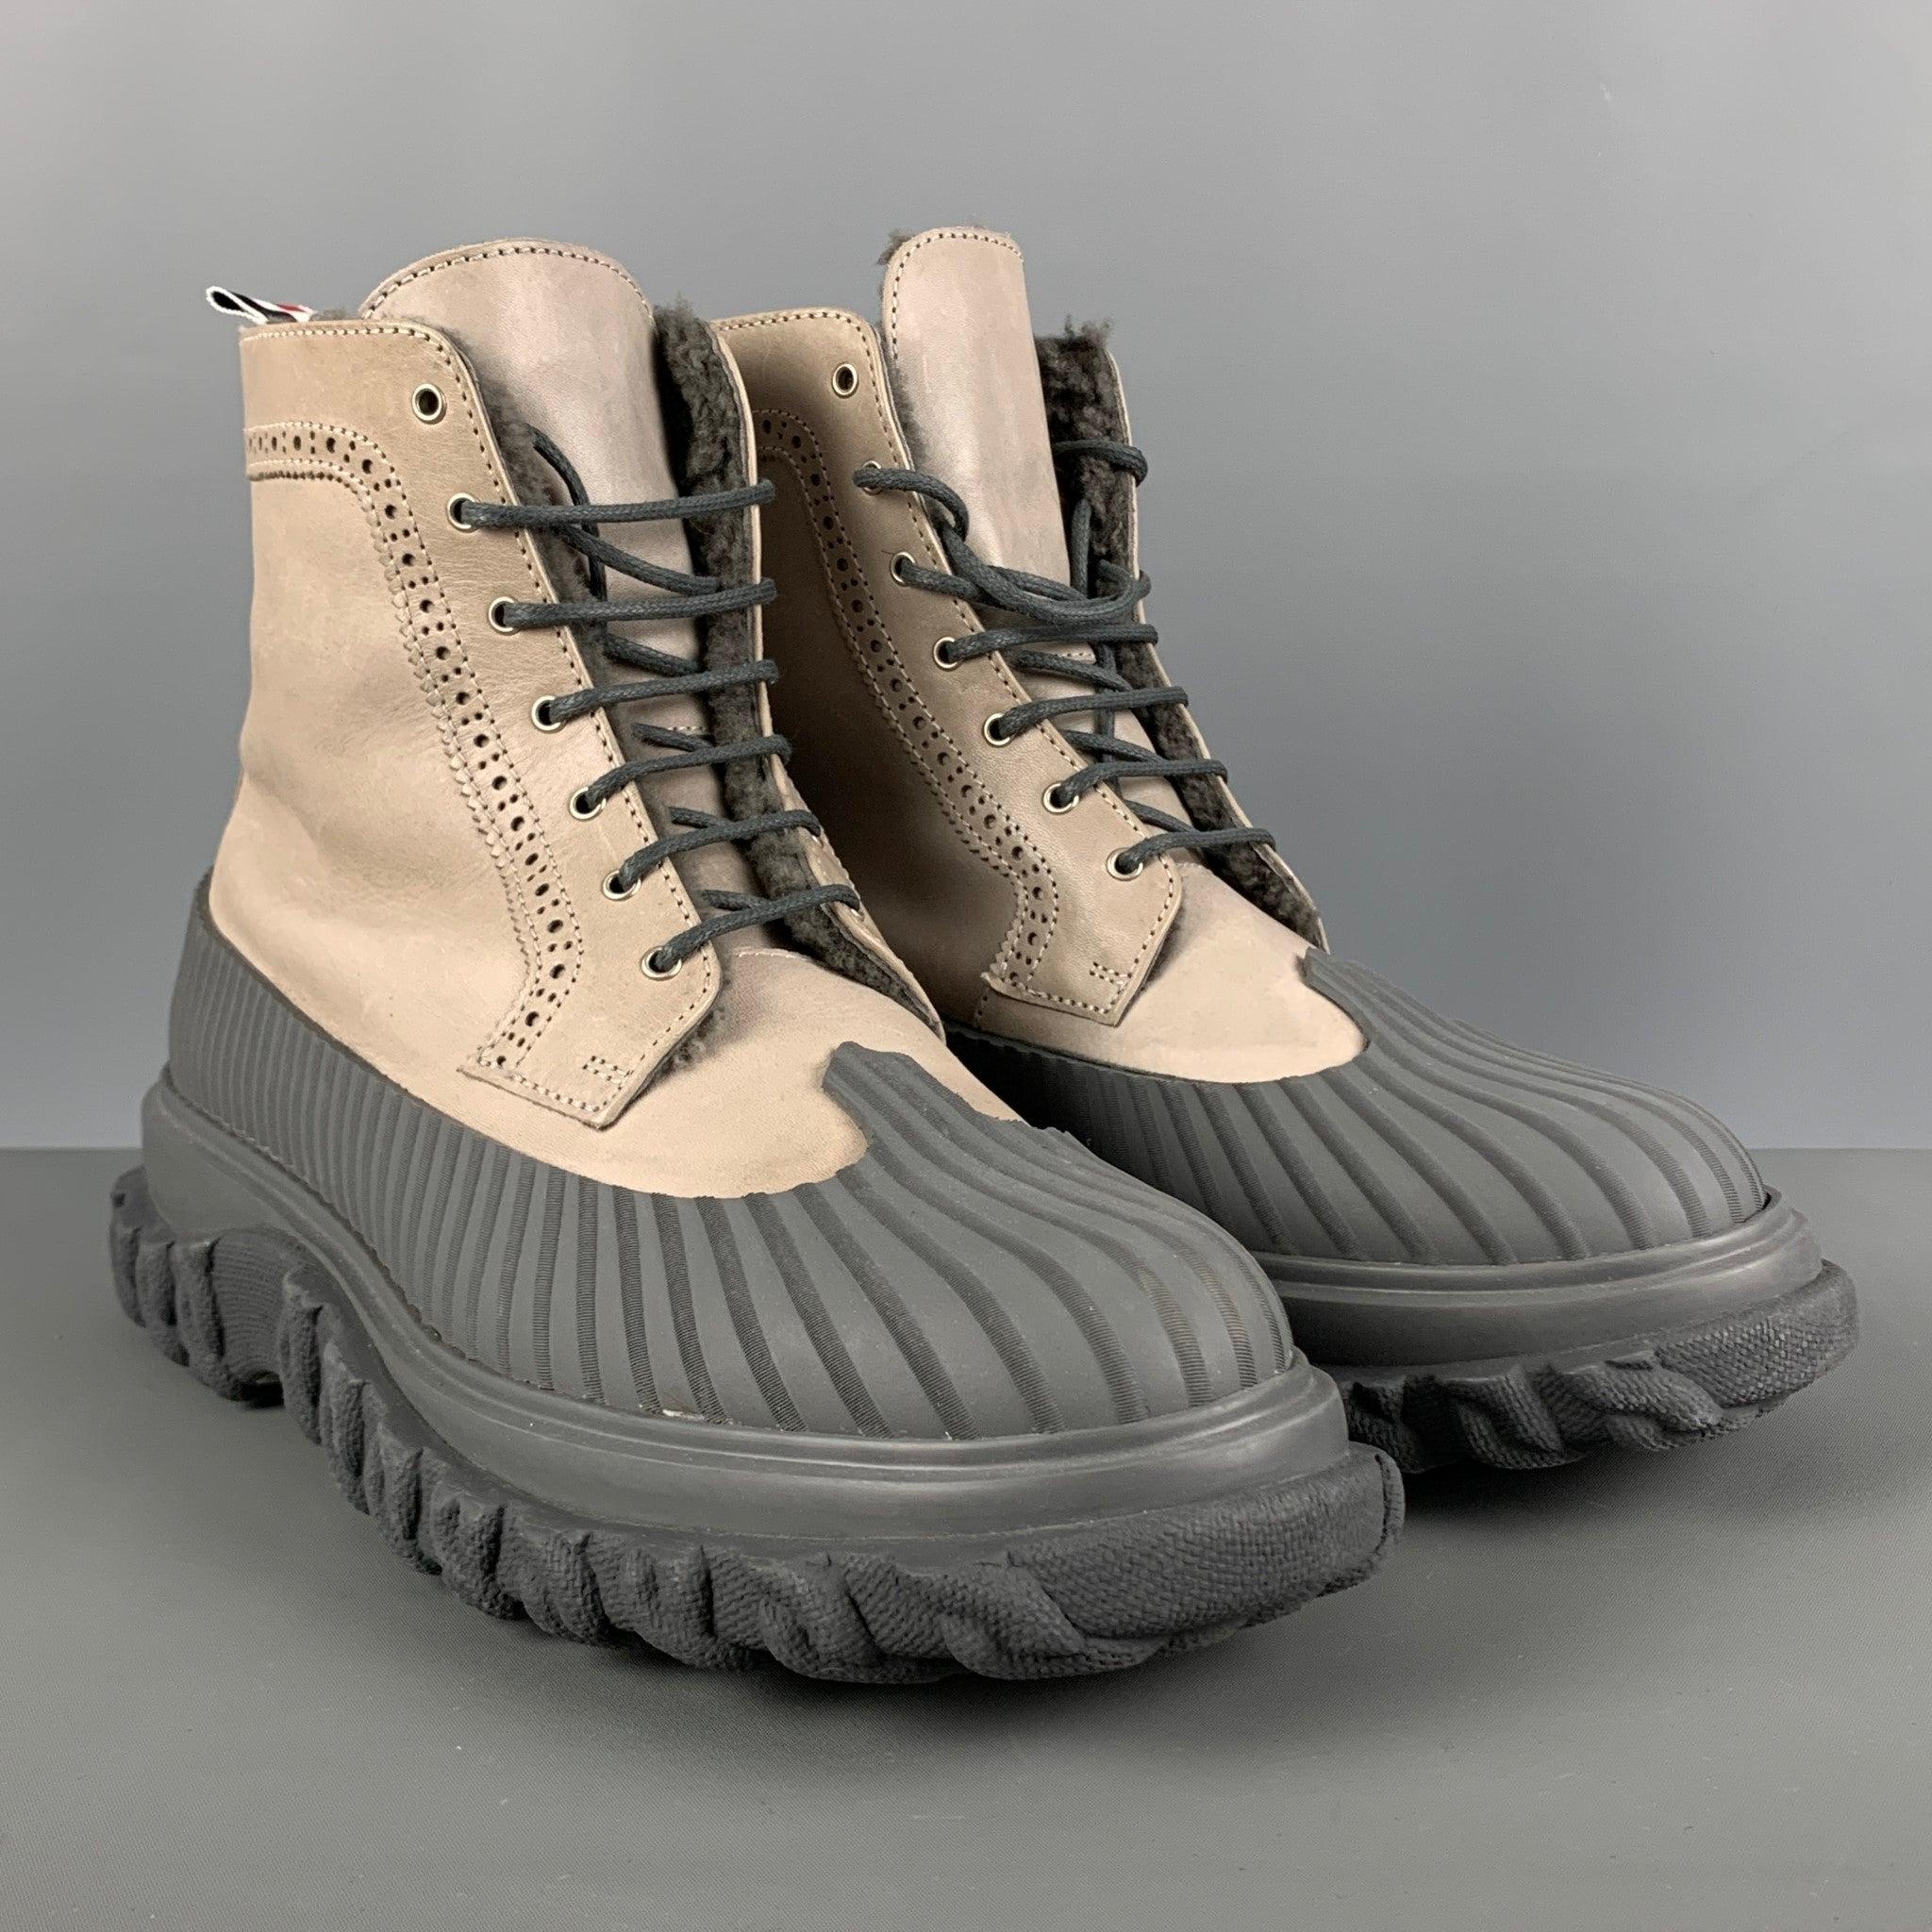 THOM BROWNE duck boots comes in a taupe calf leather featuring a perforated leather detail, polyurethane sole, fleece sherpa lining, and a lace up closure. Made in Italy.Excellent Pre-Owned Condition. 

Marked:   44 

Measurements: 
  Length: 13